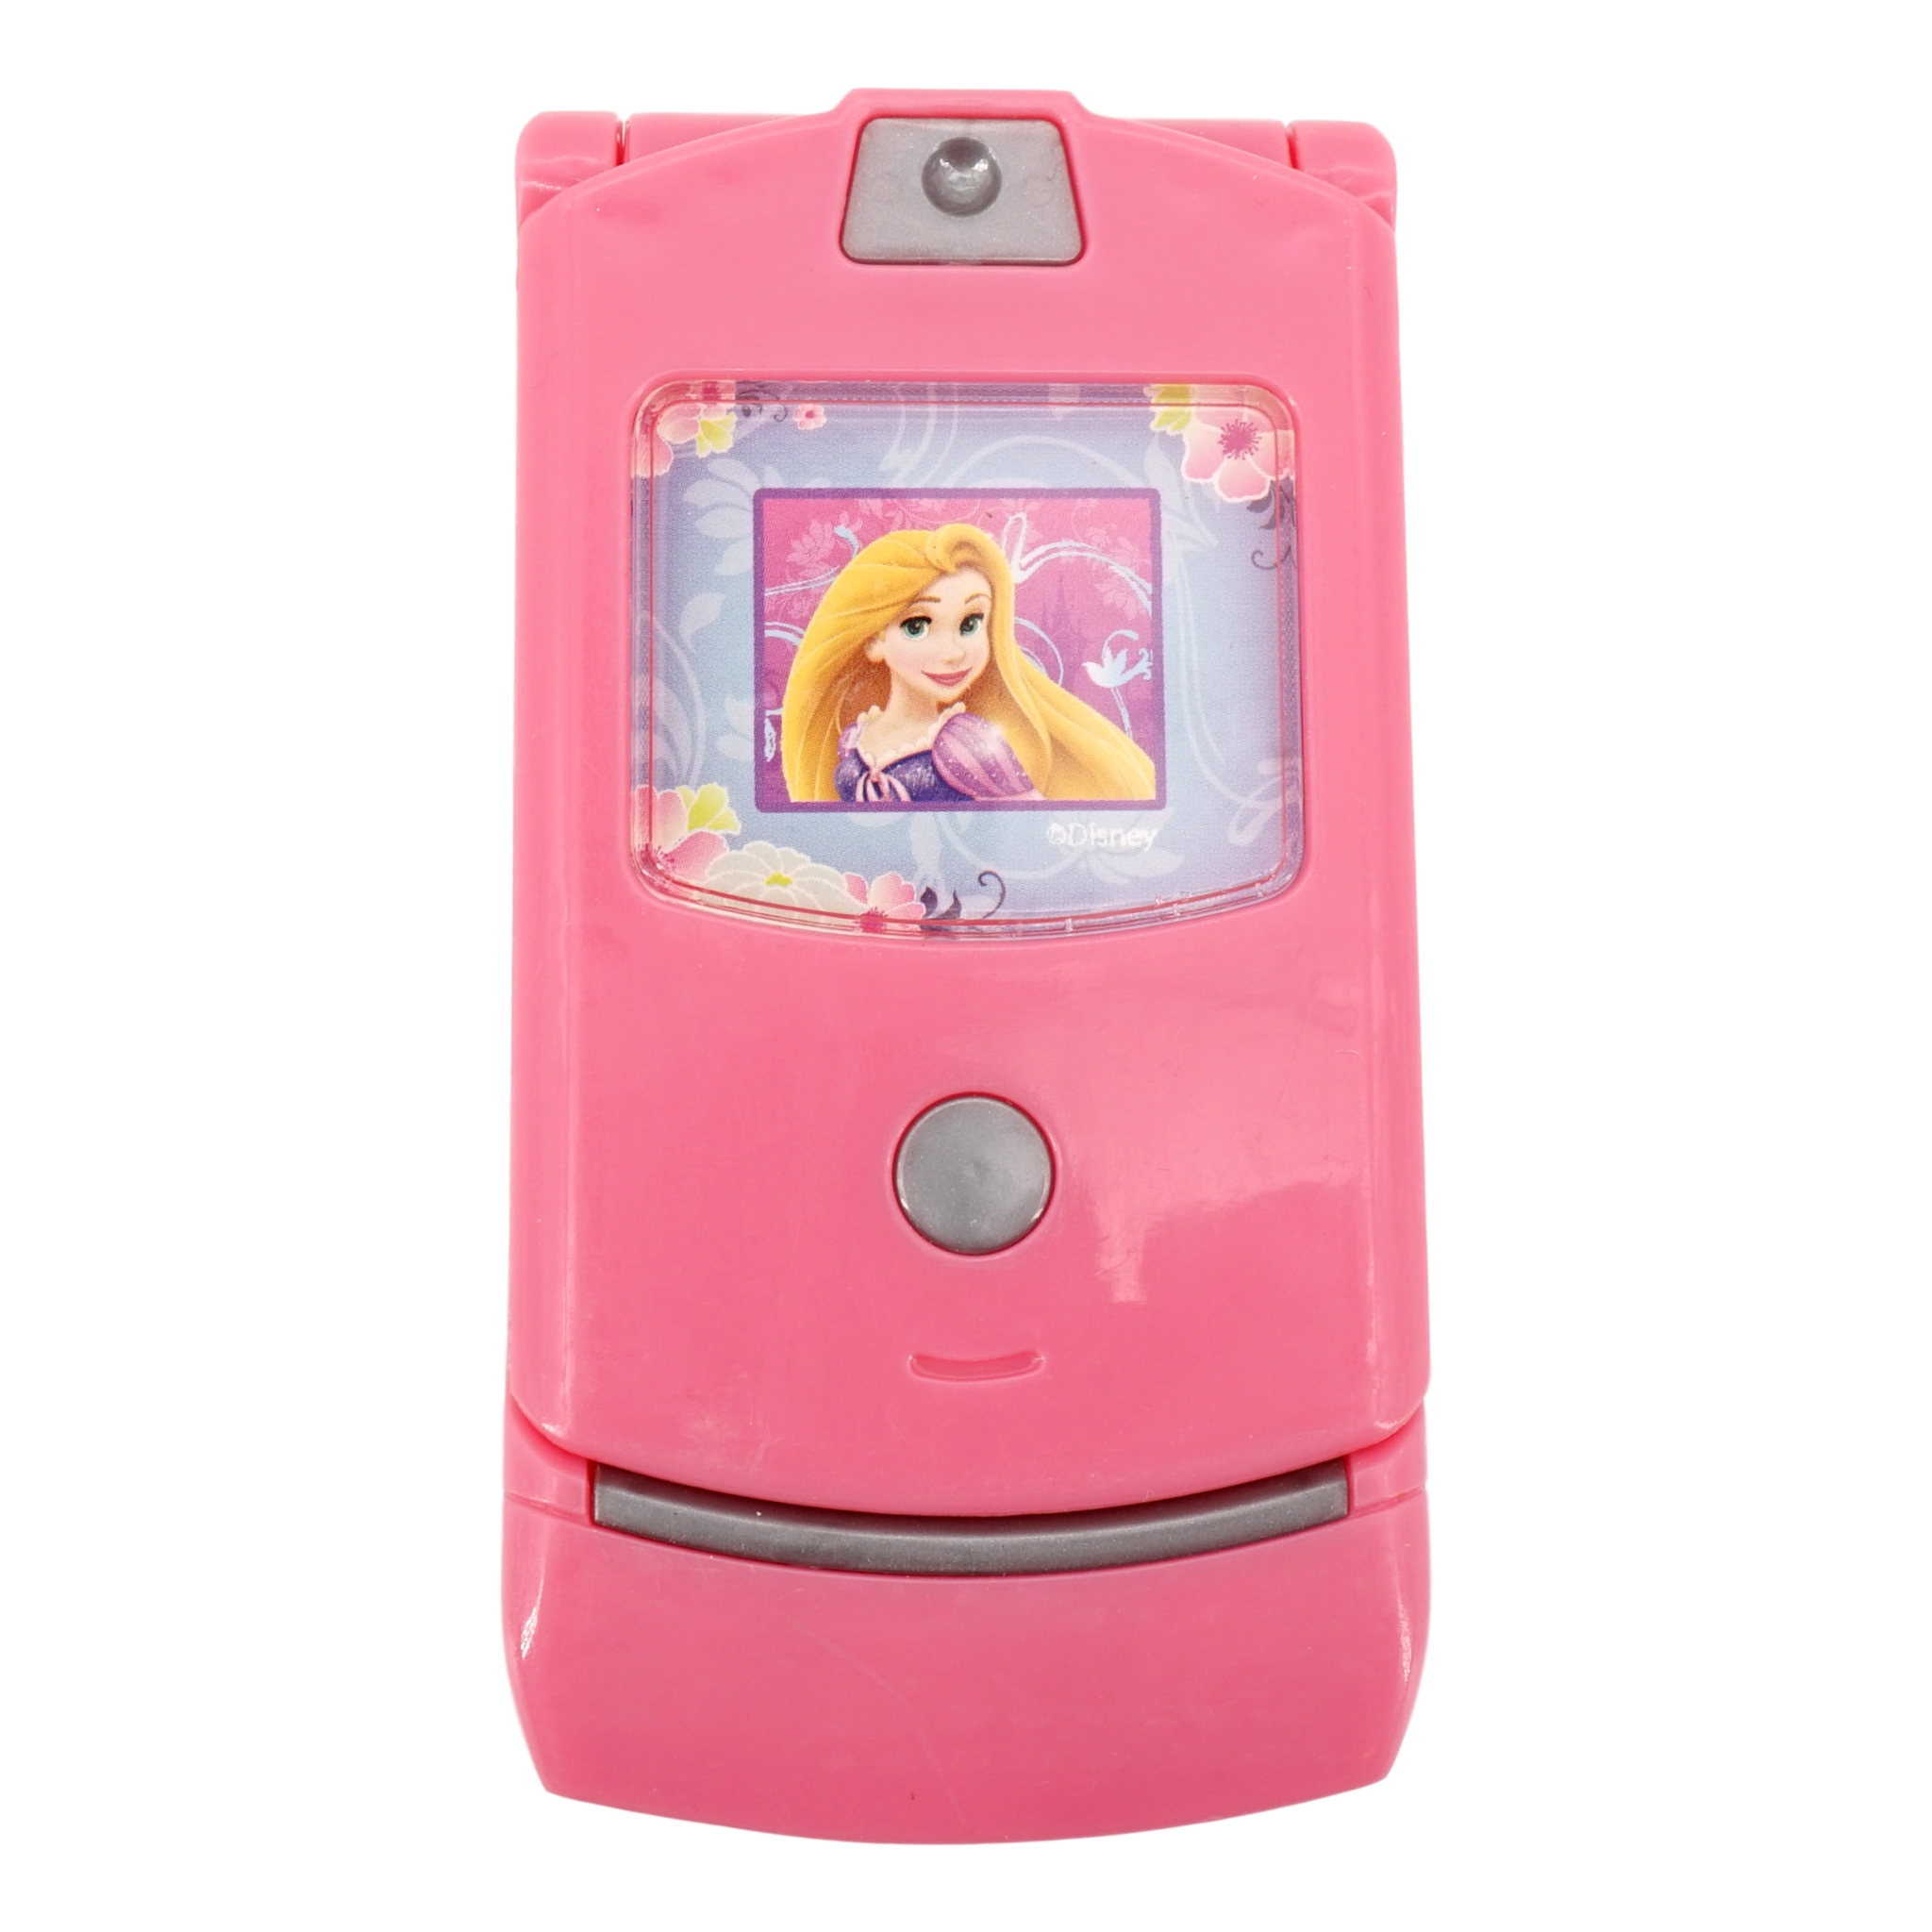 pink phone toy